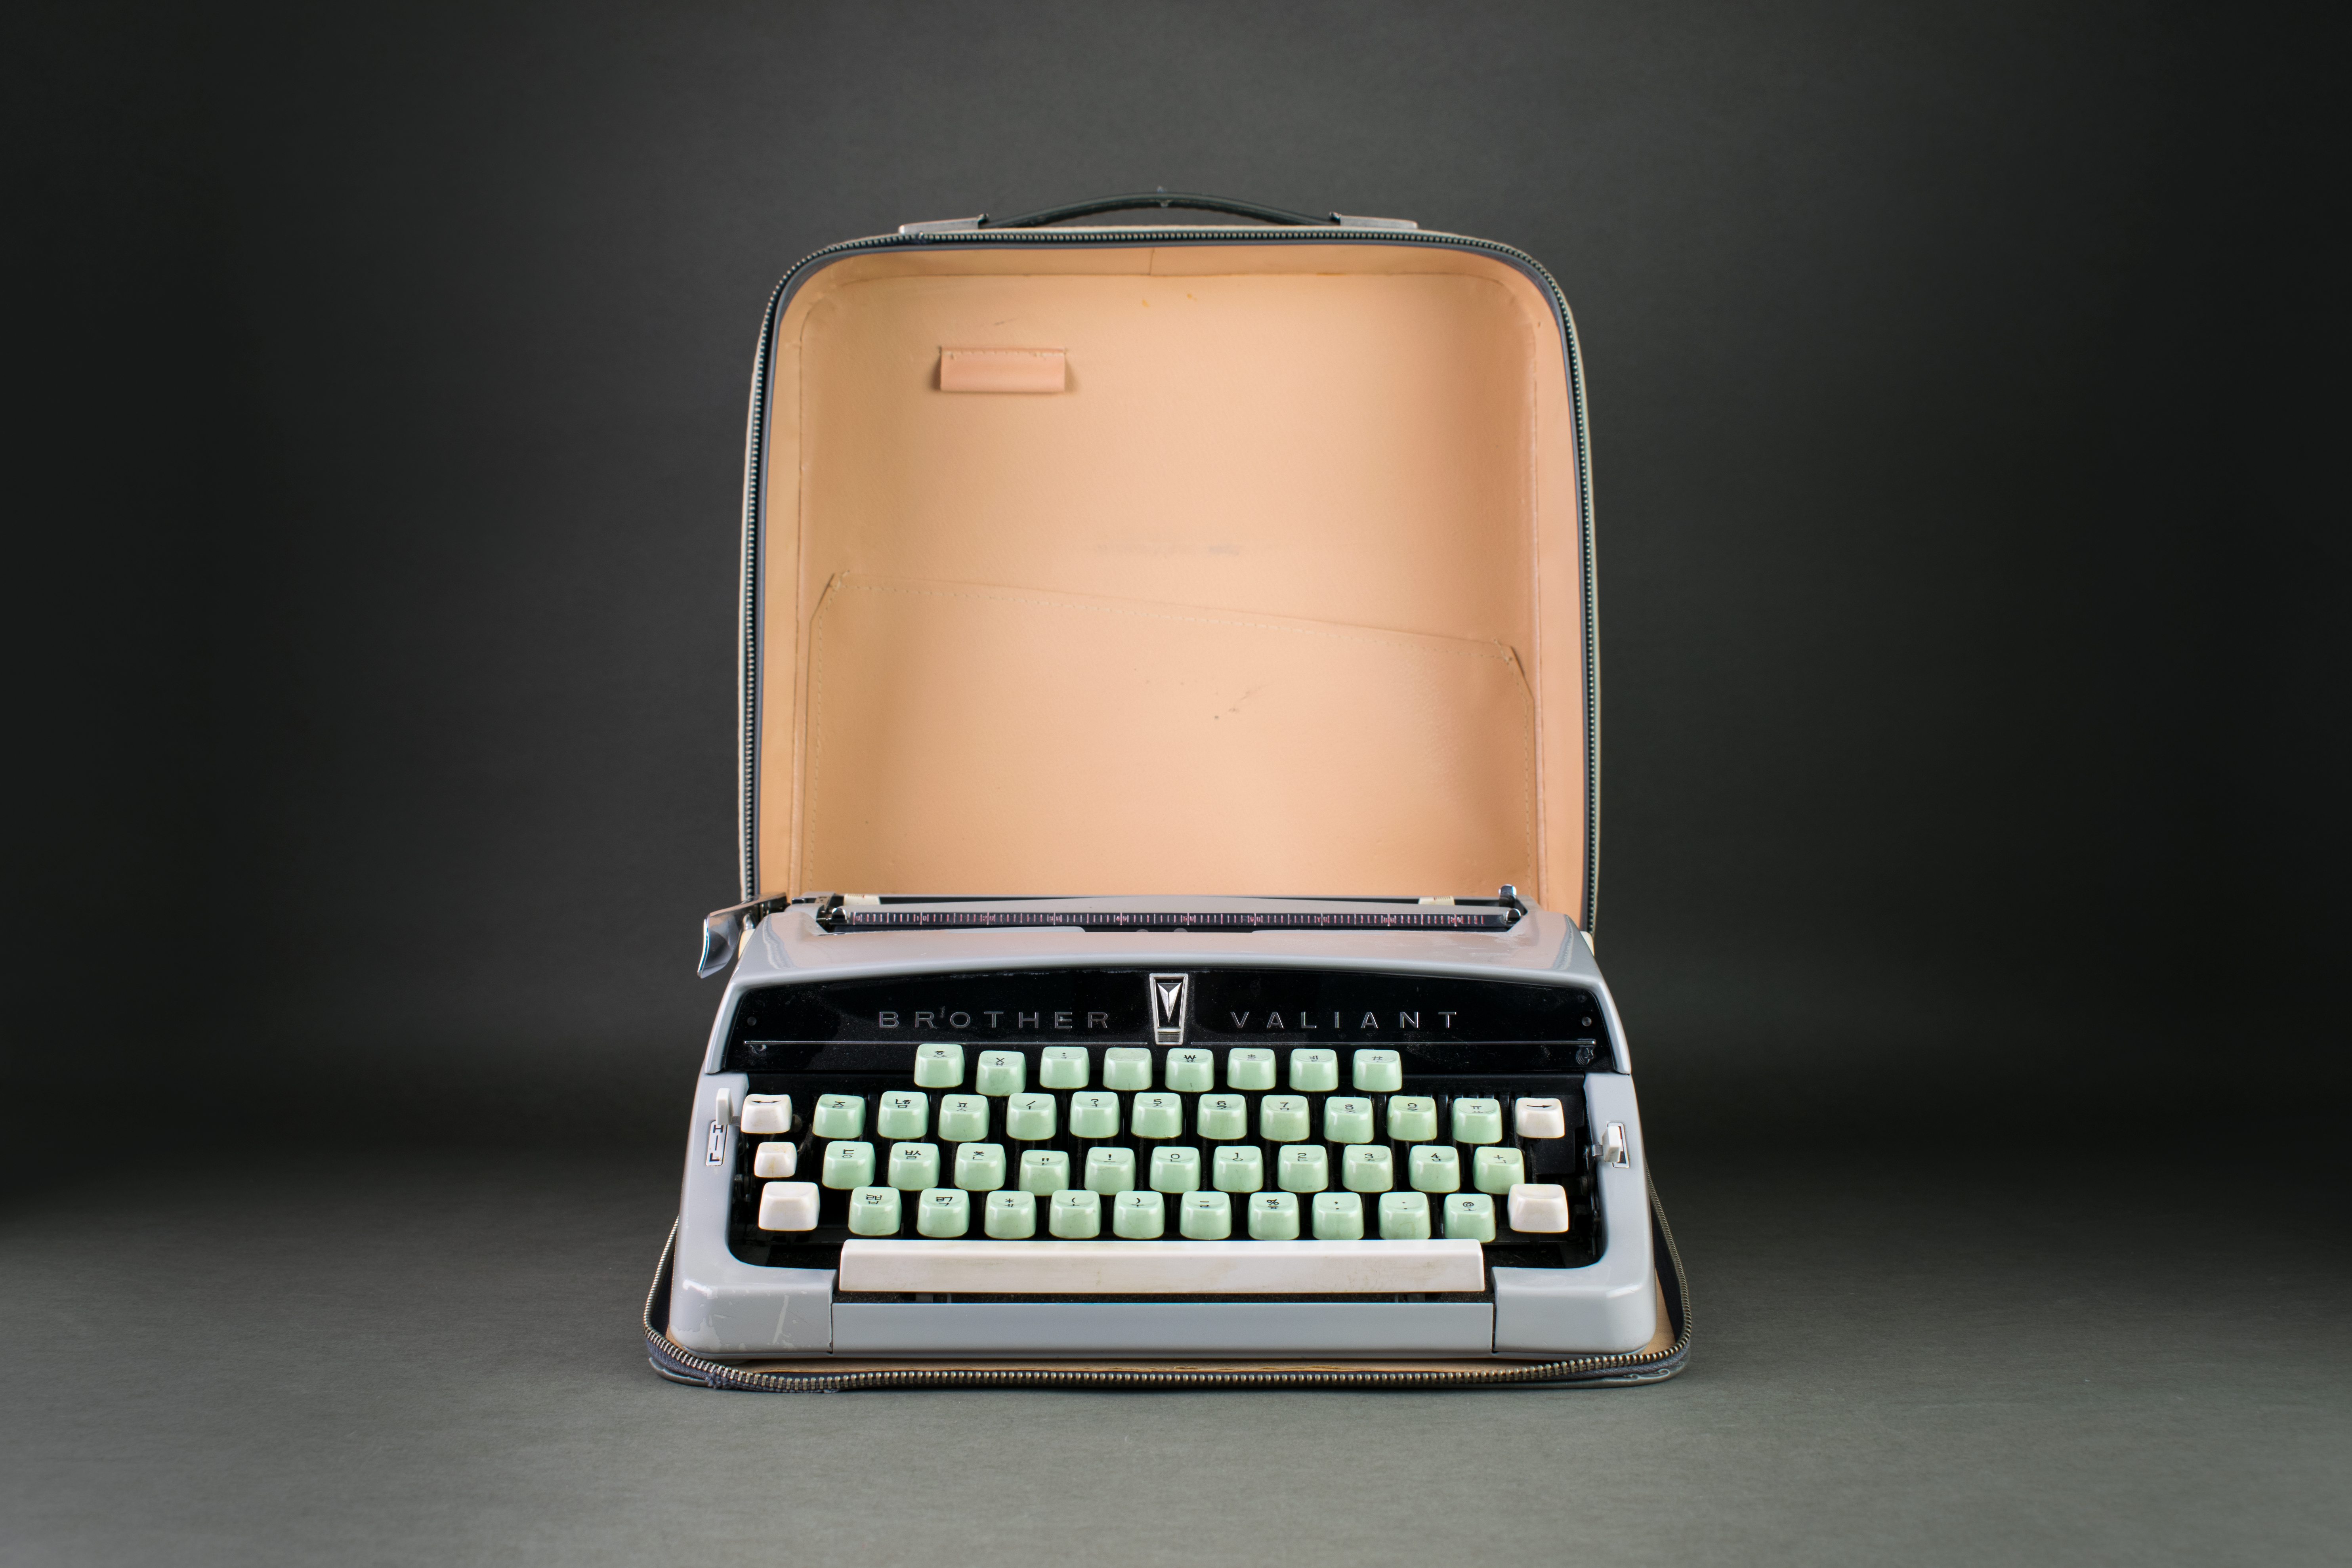 Typewriter of pediatrician and radiologist Sukil Lee, 1960s. Radioligist and pediatrician and radiologist Dr. Sukil Lee initiated the recruitment of South-Korean nurses to Germany. He was working at the University-Clinic of Mainz. On this typewriter, Dr.Lee wrote the entire correspondence for the recruitment of Korean nurses during the 1960s. DOMiD-Archive, Cologne, E 1359,0046